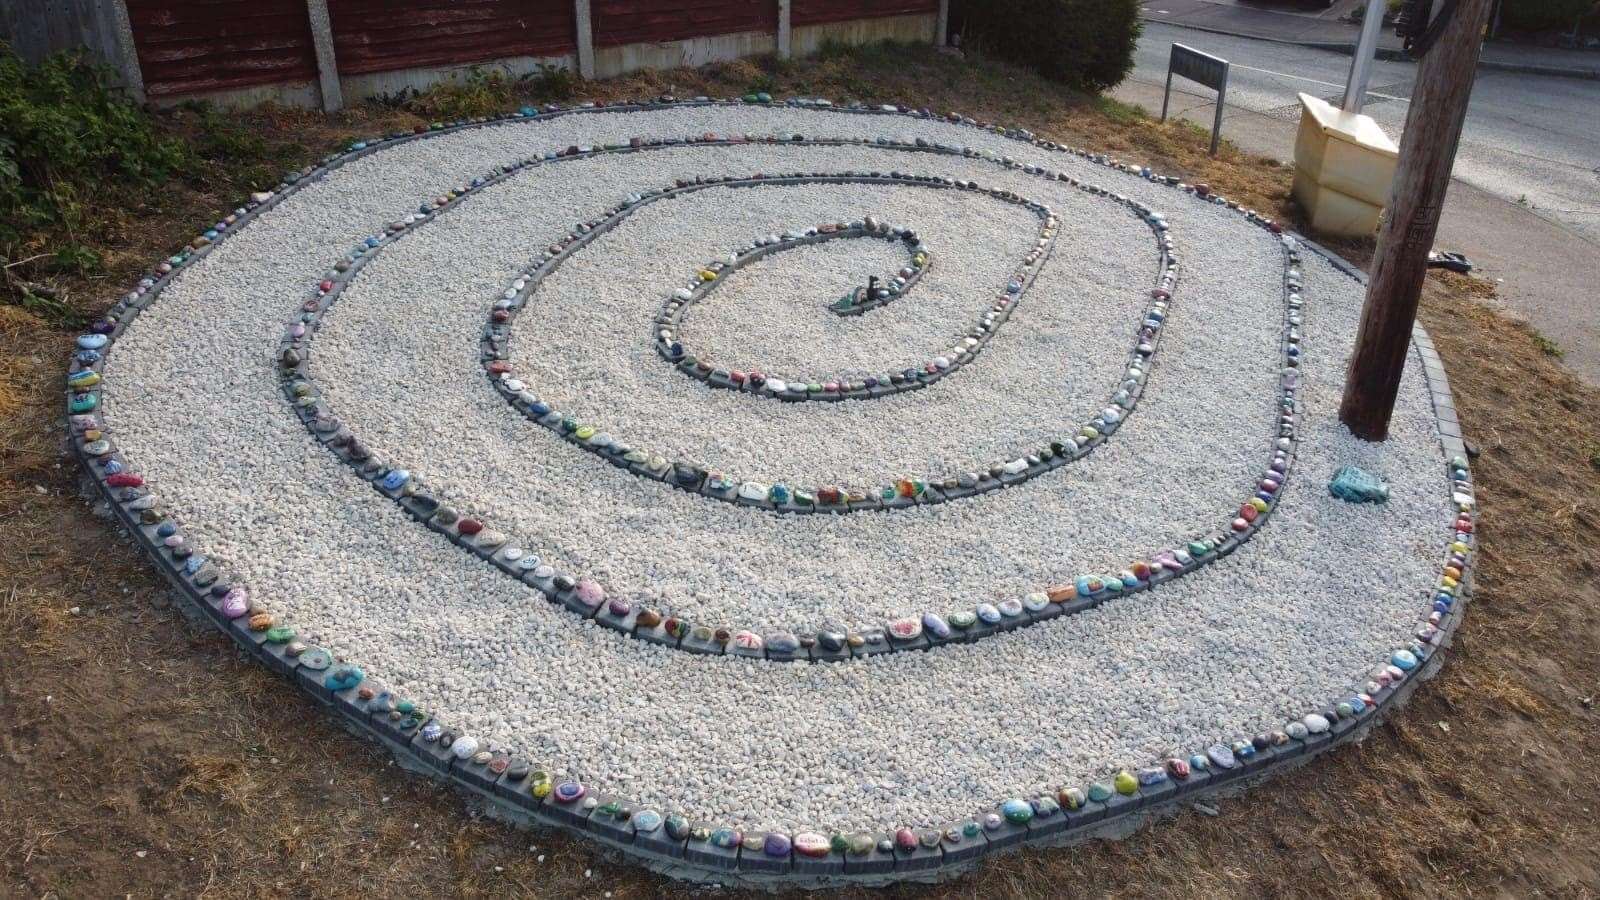 The snake is made up of about 700 decorated stones. Picture: Aimee Skinner